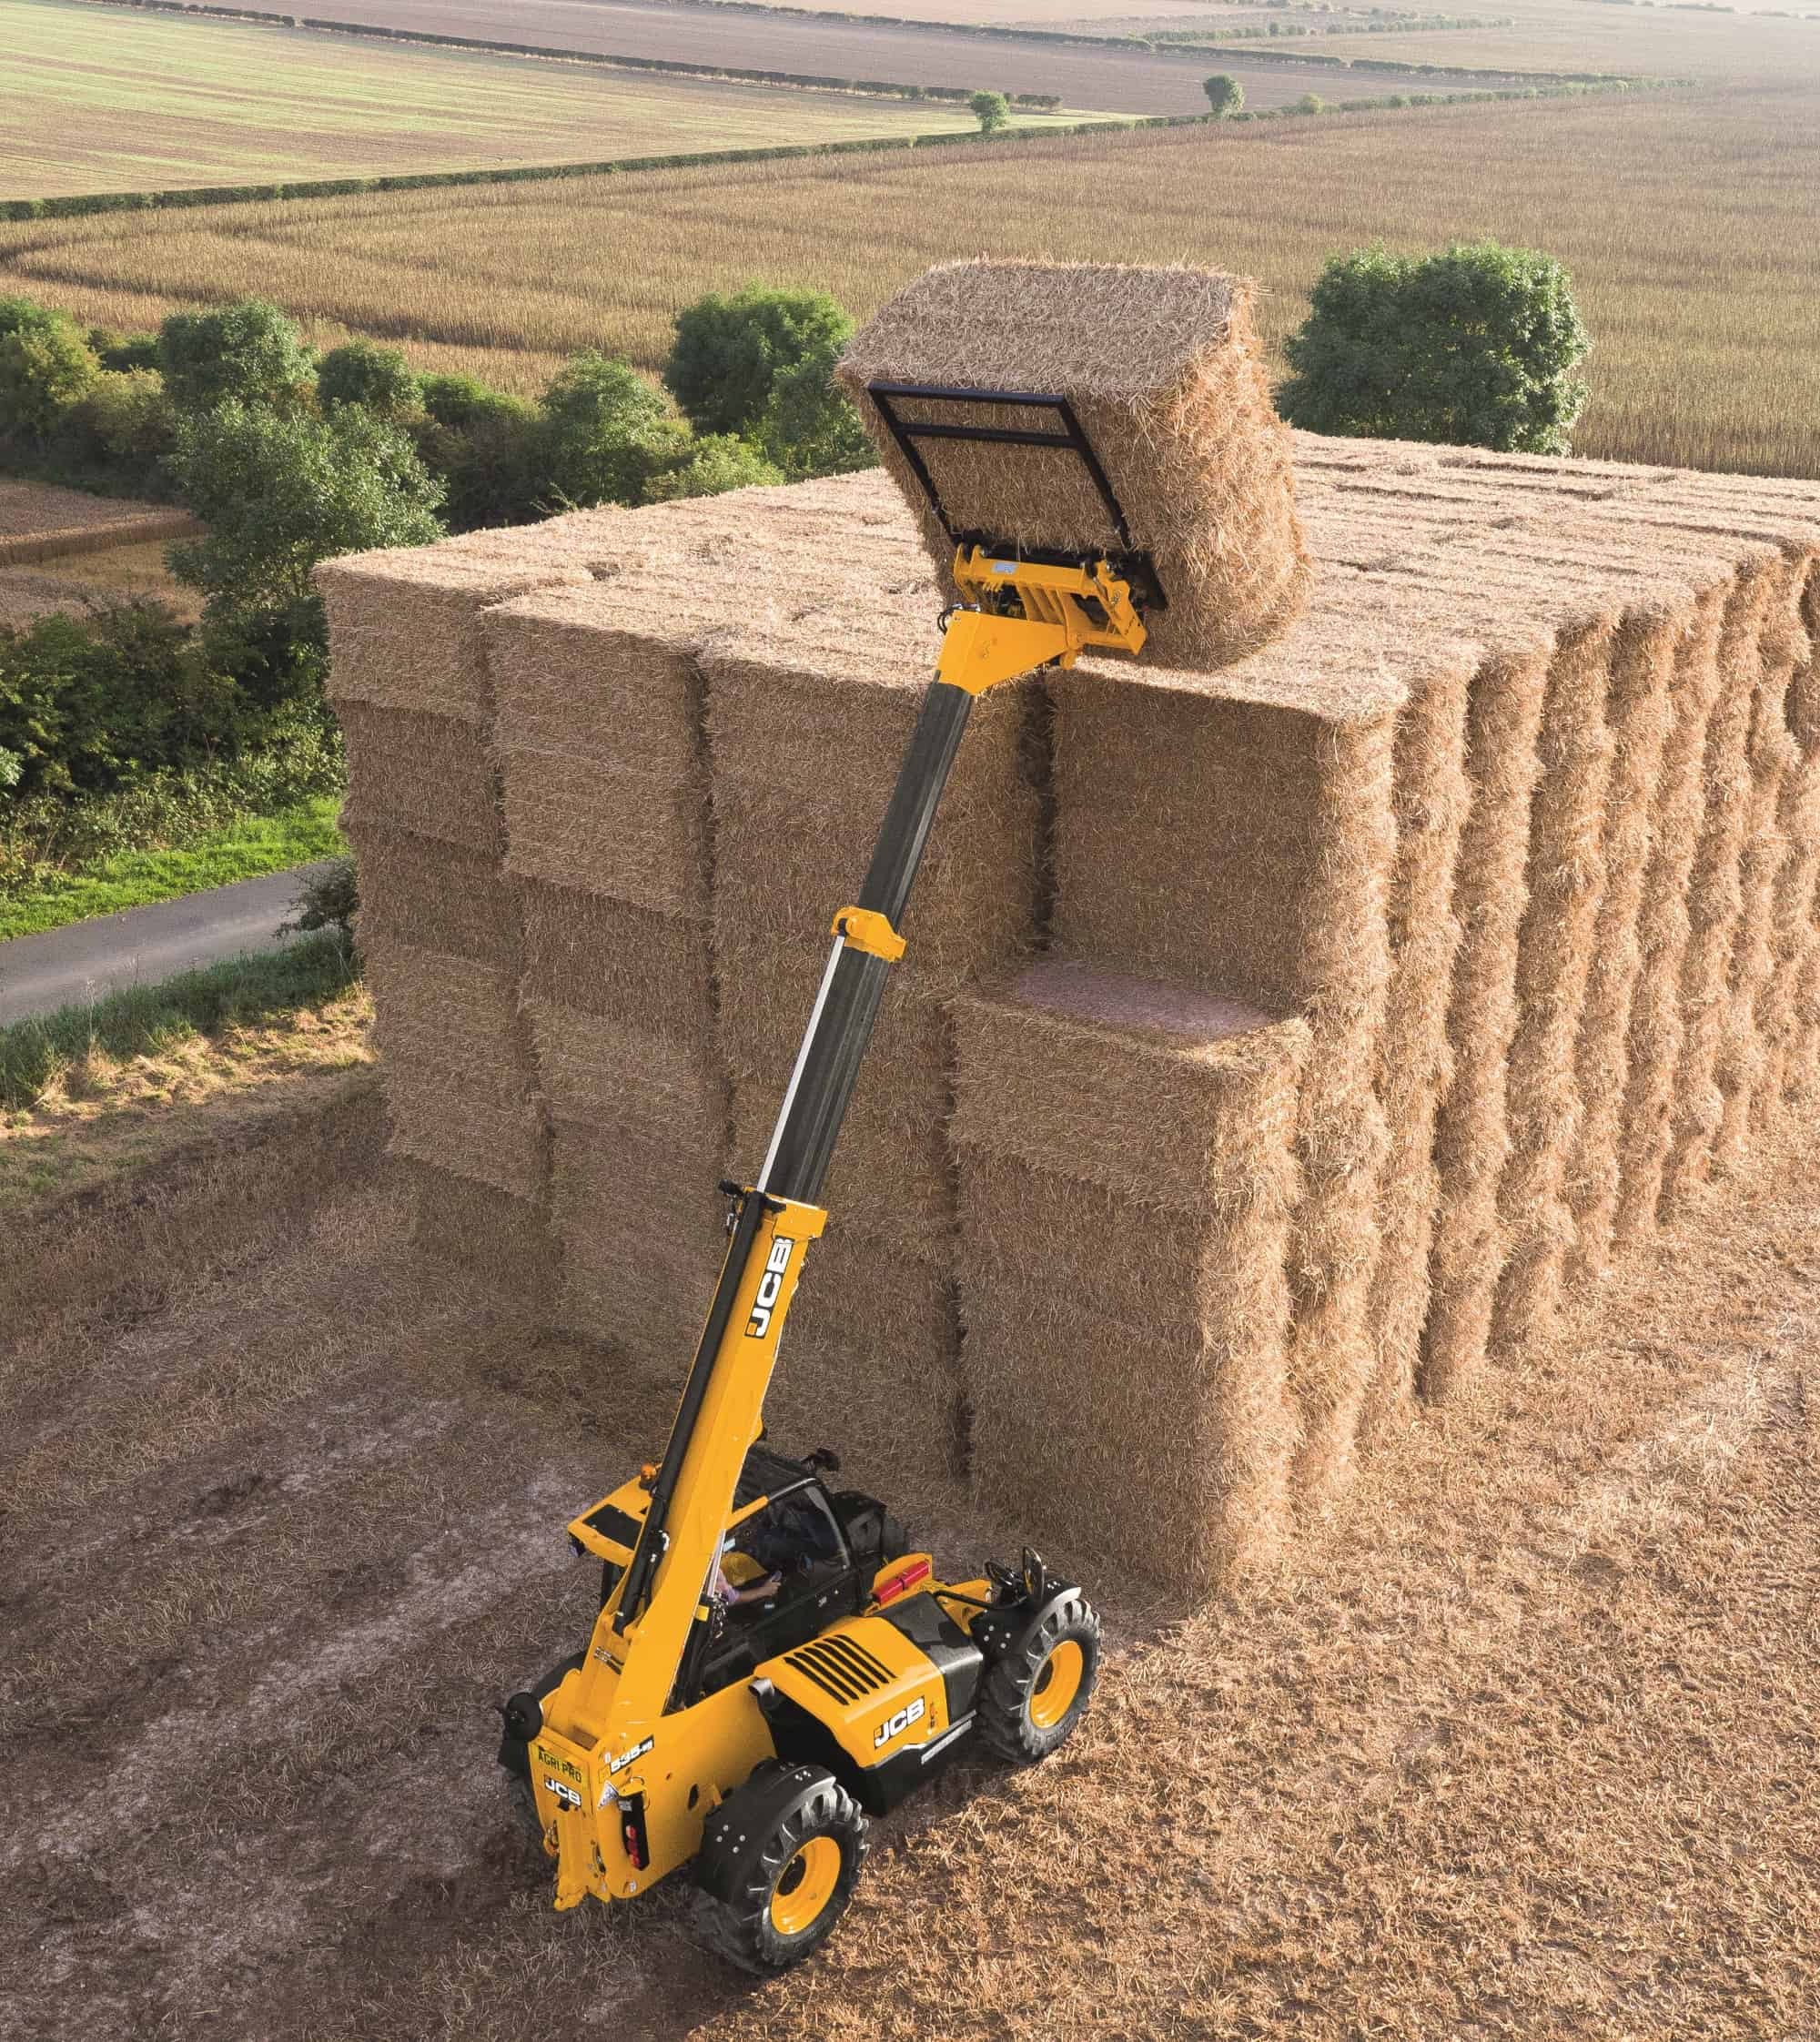 JCB bale spike and grab attachments ensure efficient handling